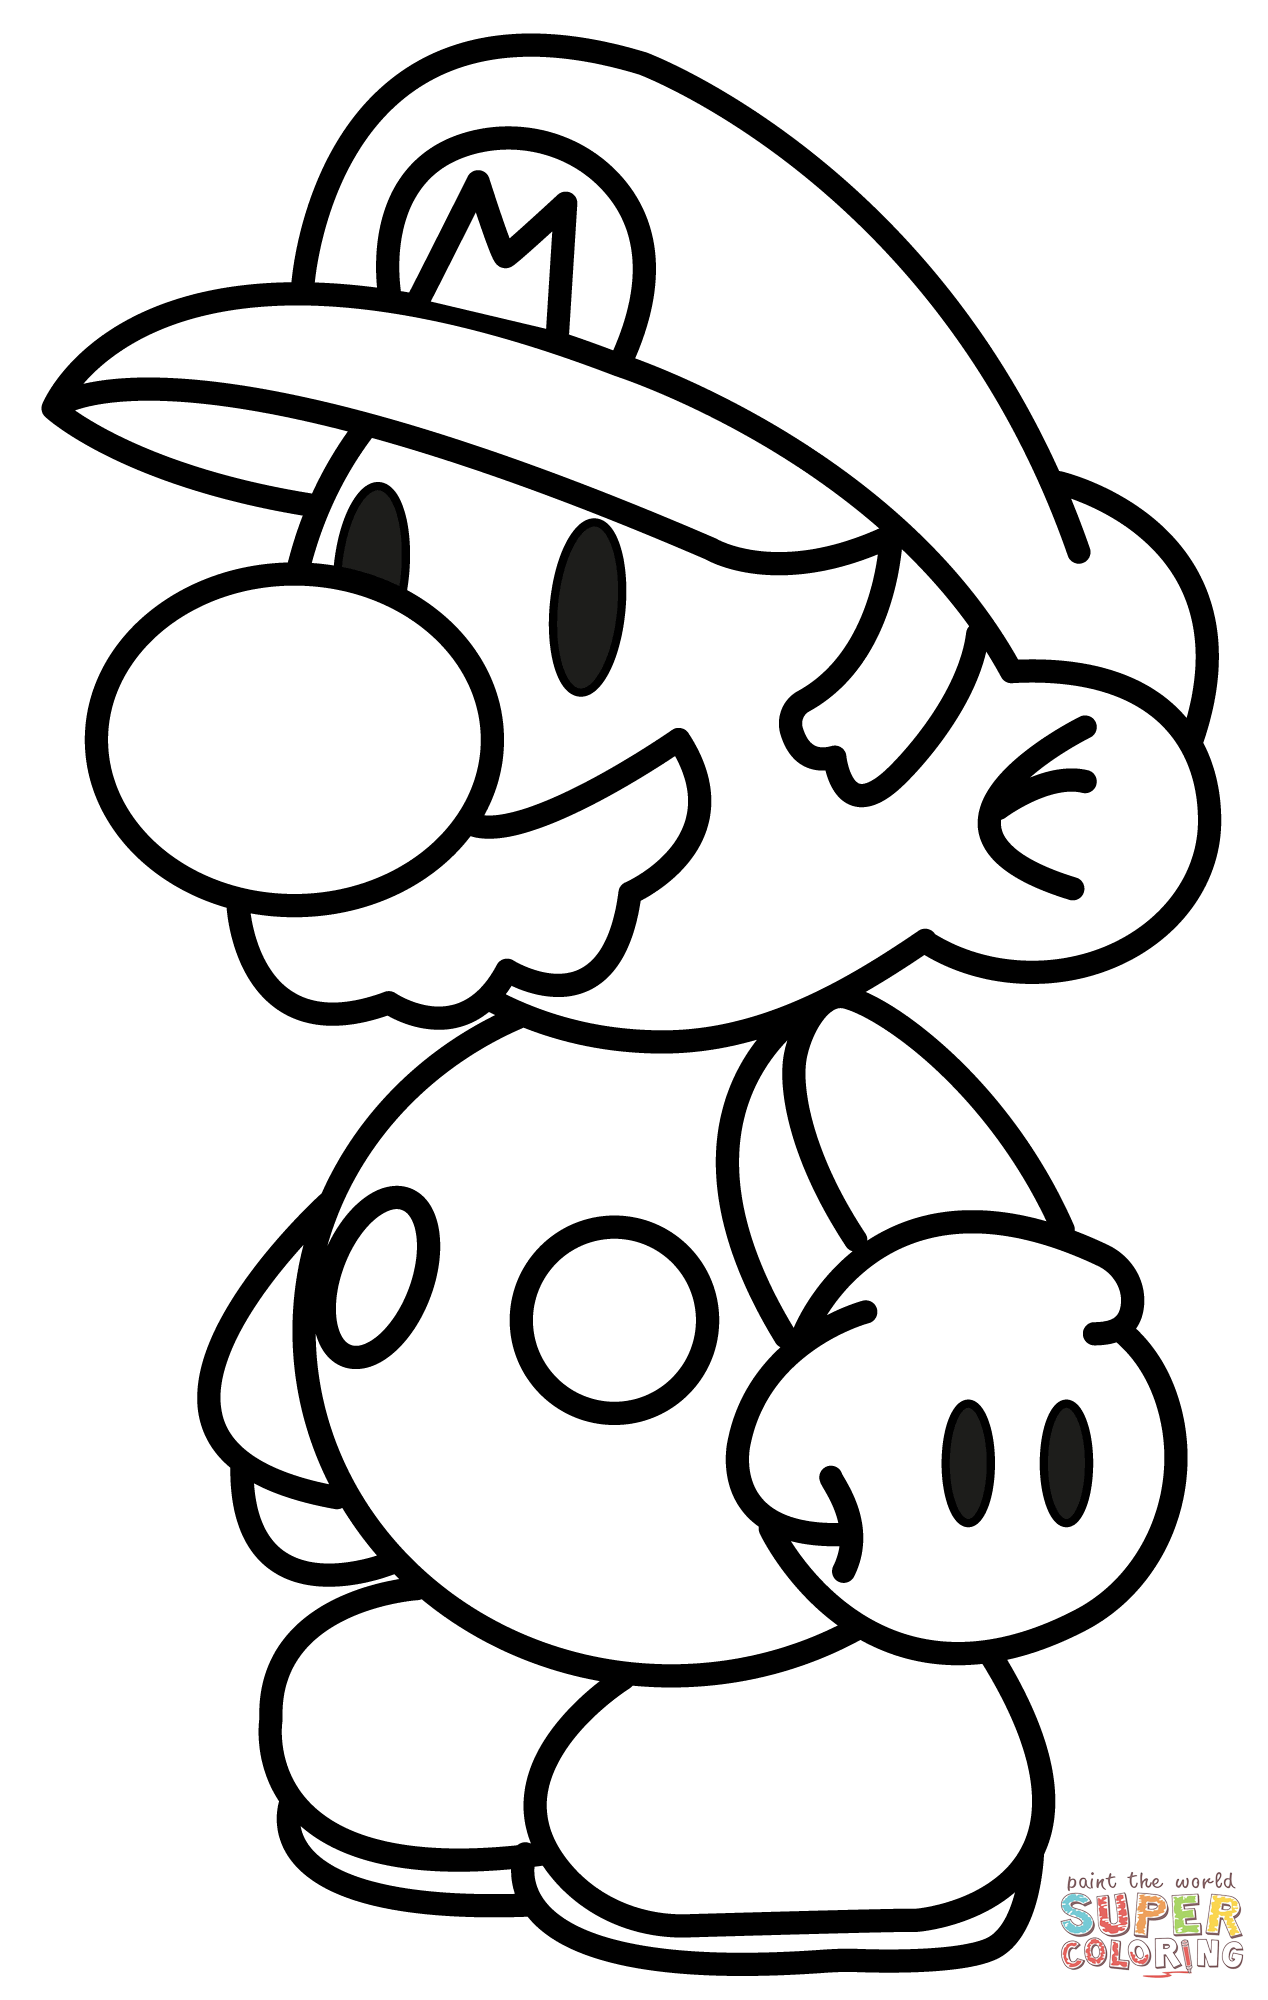 Chibi Mario coloring page | Free Printable Coloring Pages